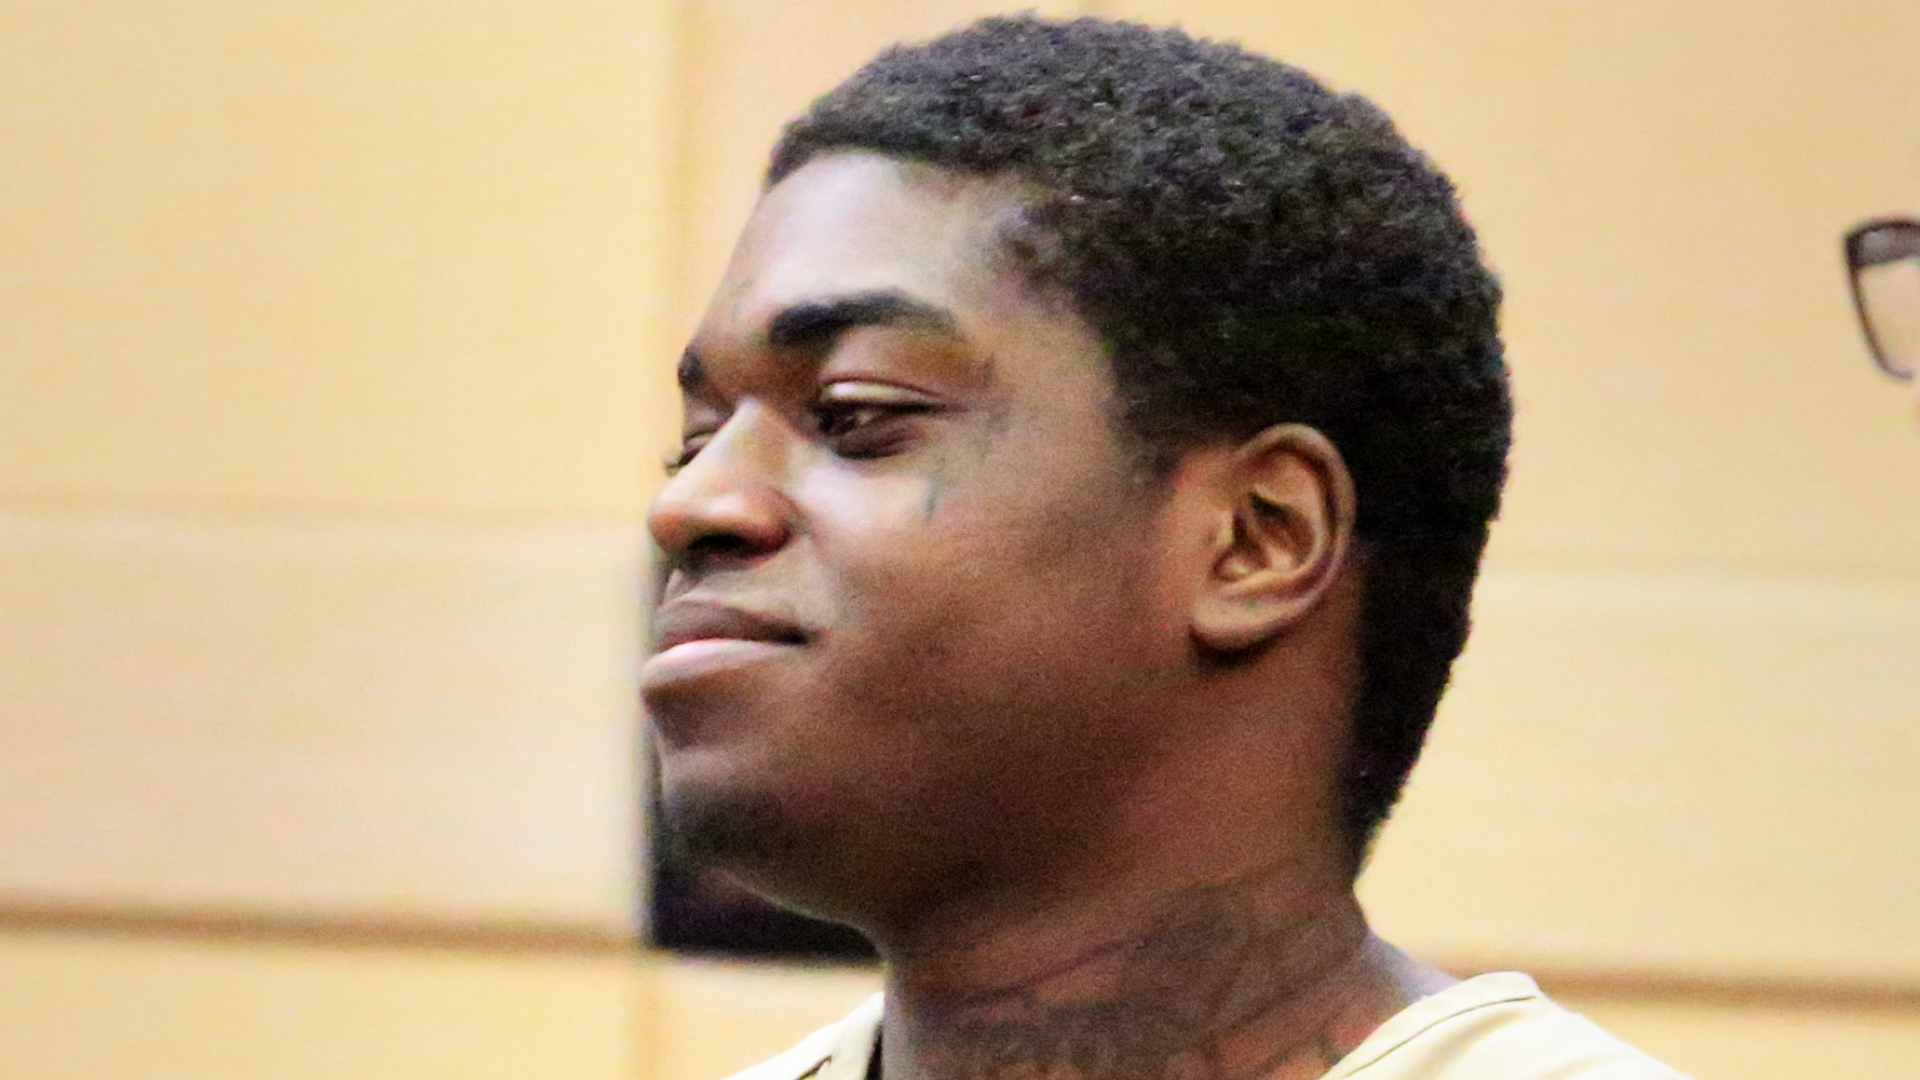 Kodak Black Too Young To Handle Everything Being Thrown At Him His Probation Officer Says South Florida Sun Sentinel South Florida Sun Sentinel